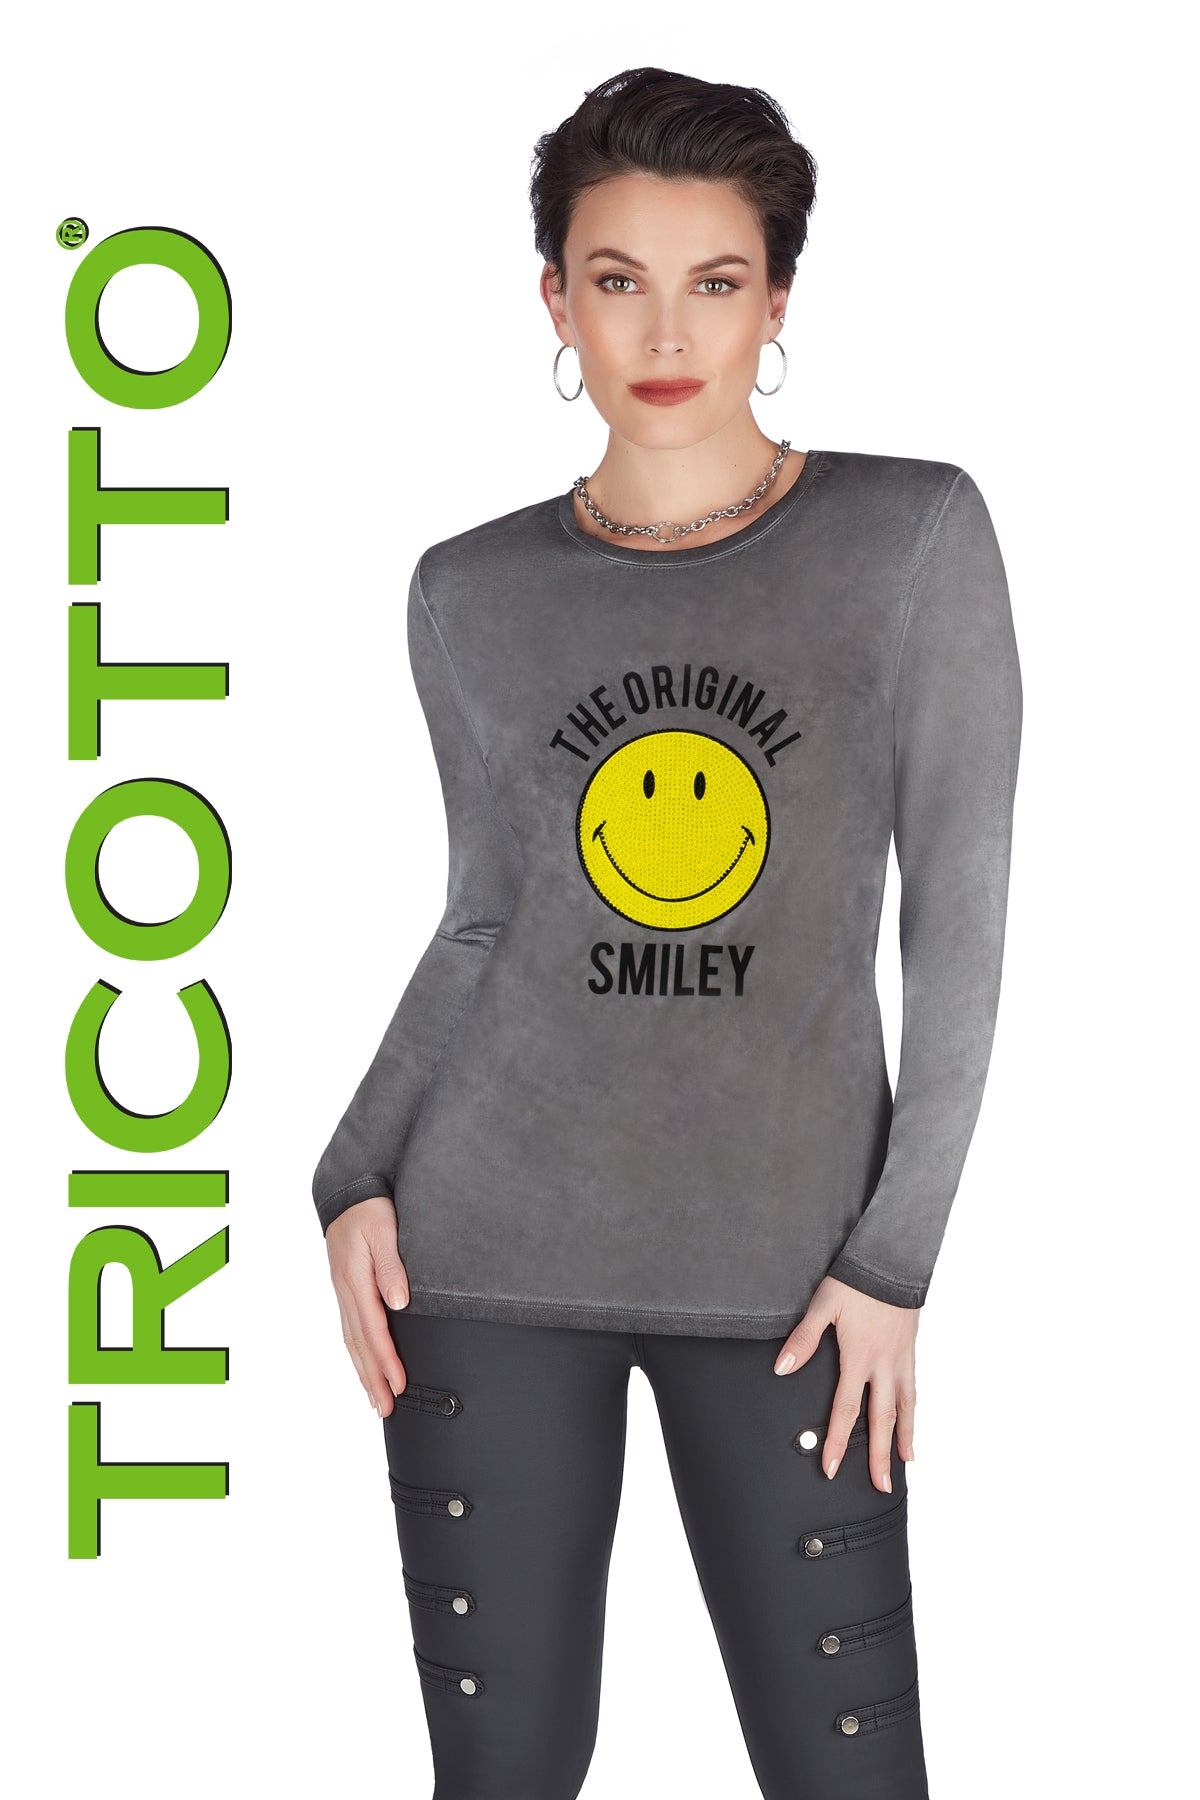 Tricotto T-shirts-Buy Tricotto Clothing Online-Tricotto Tops-Tricotto Online Shop